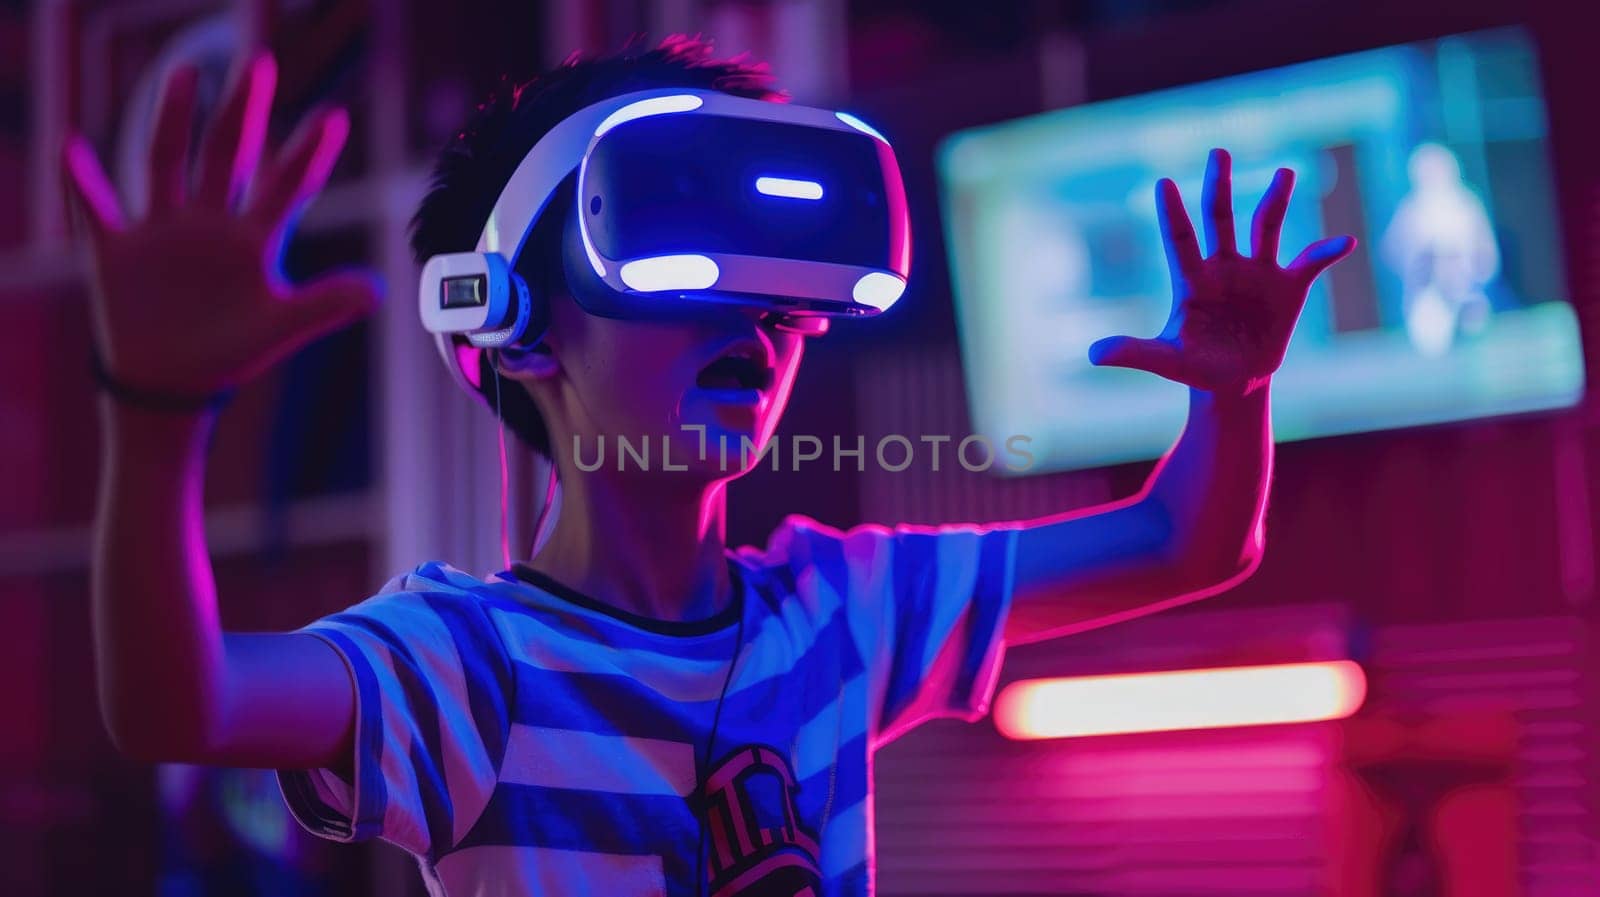 Photo of a young boy wearing futuristic VR goggles and gesturing in the room